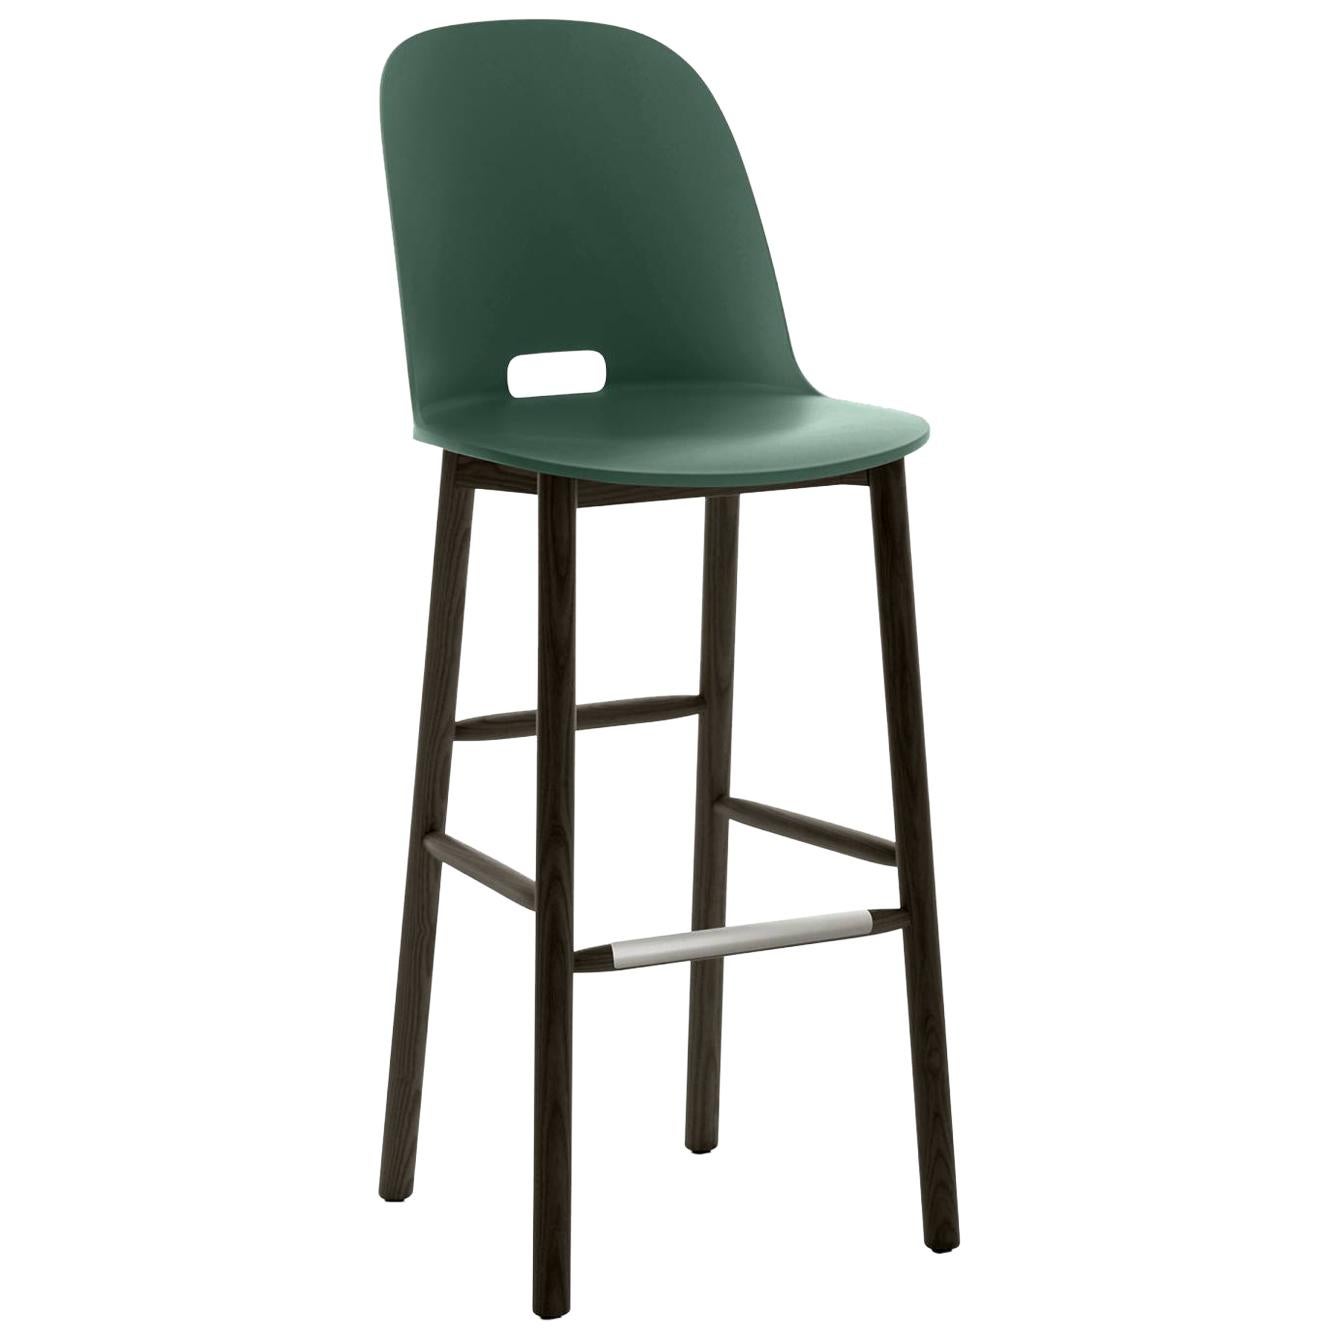 Emeco Alfi Barstool in Green and Dark Ash with High Back by Jasper Morrison For Sale